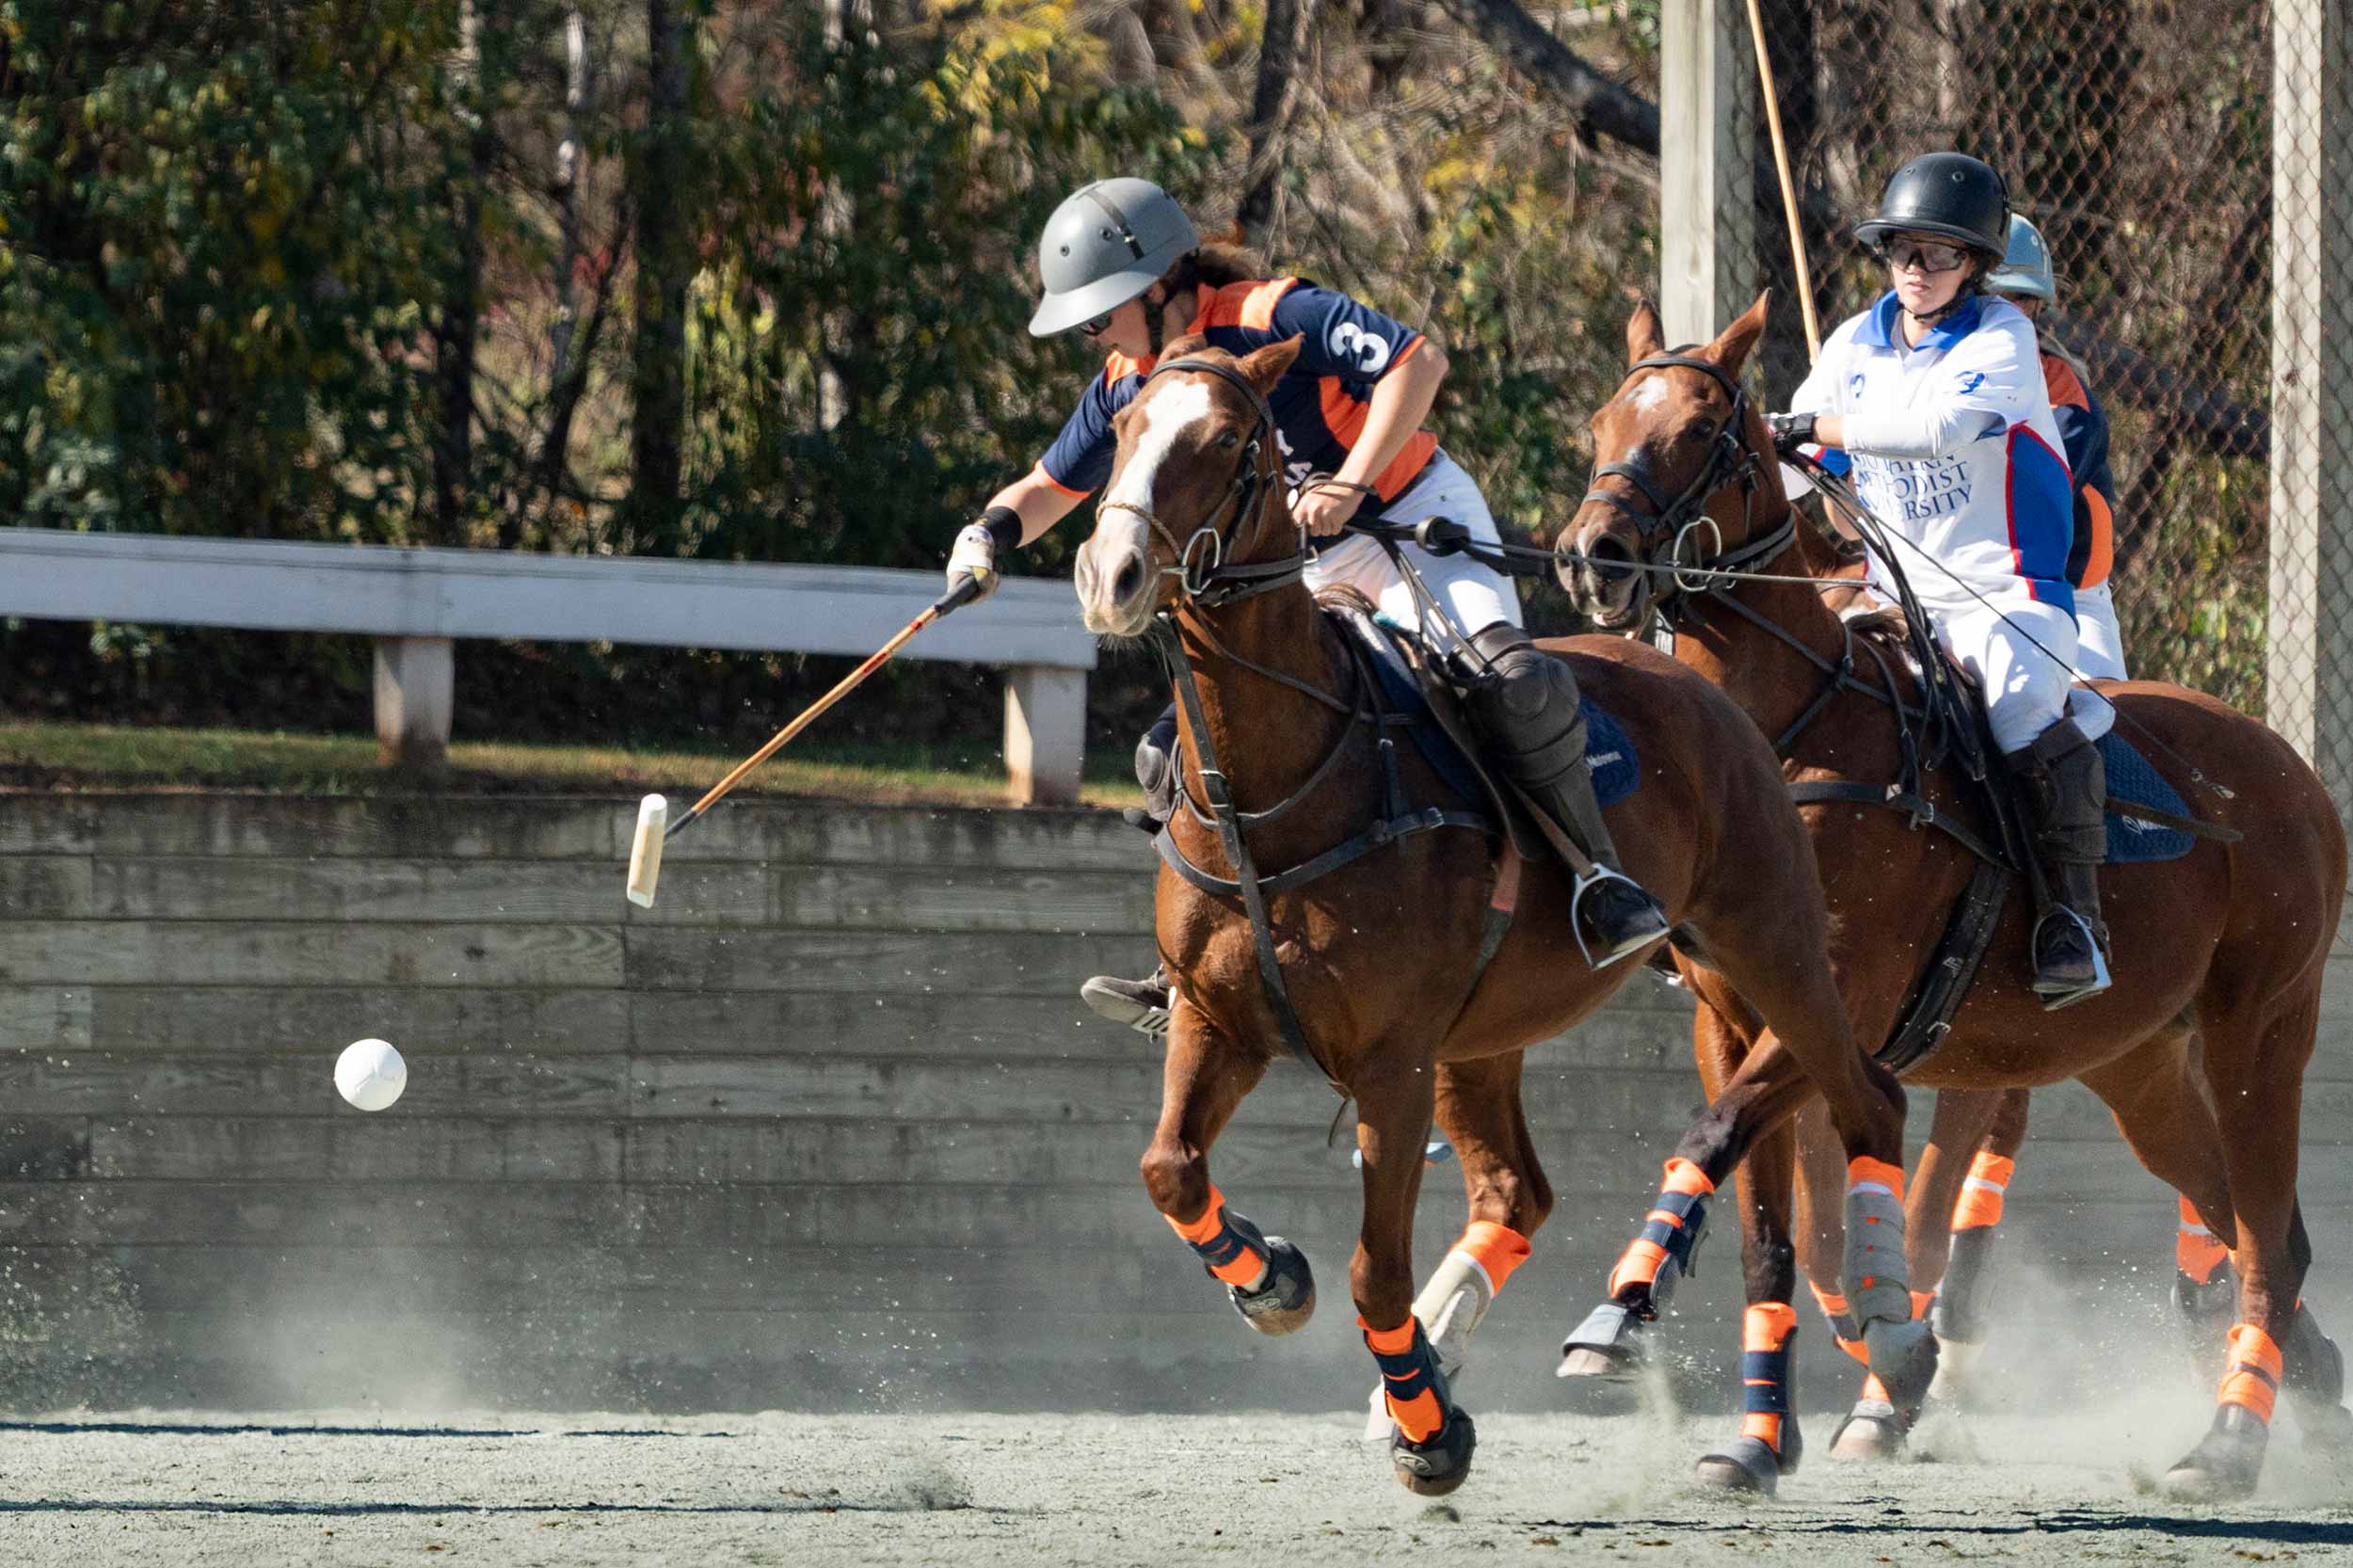 UVA polo player hitting a ball while her horse is in full gallop